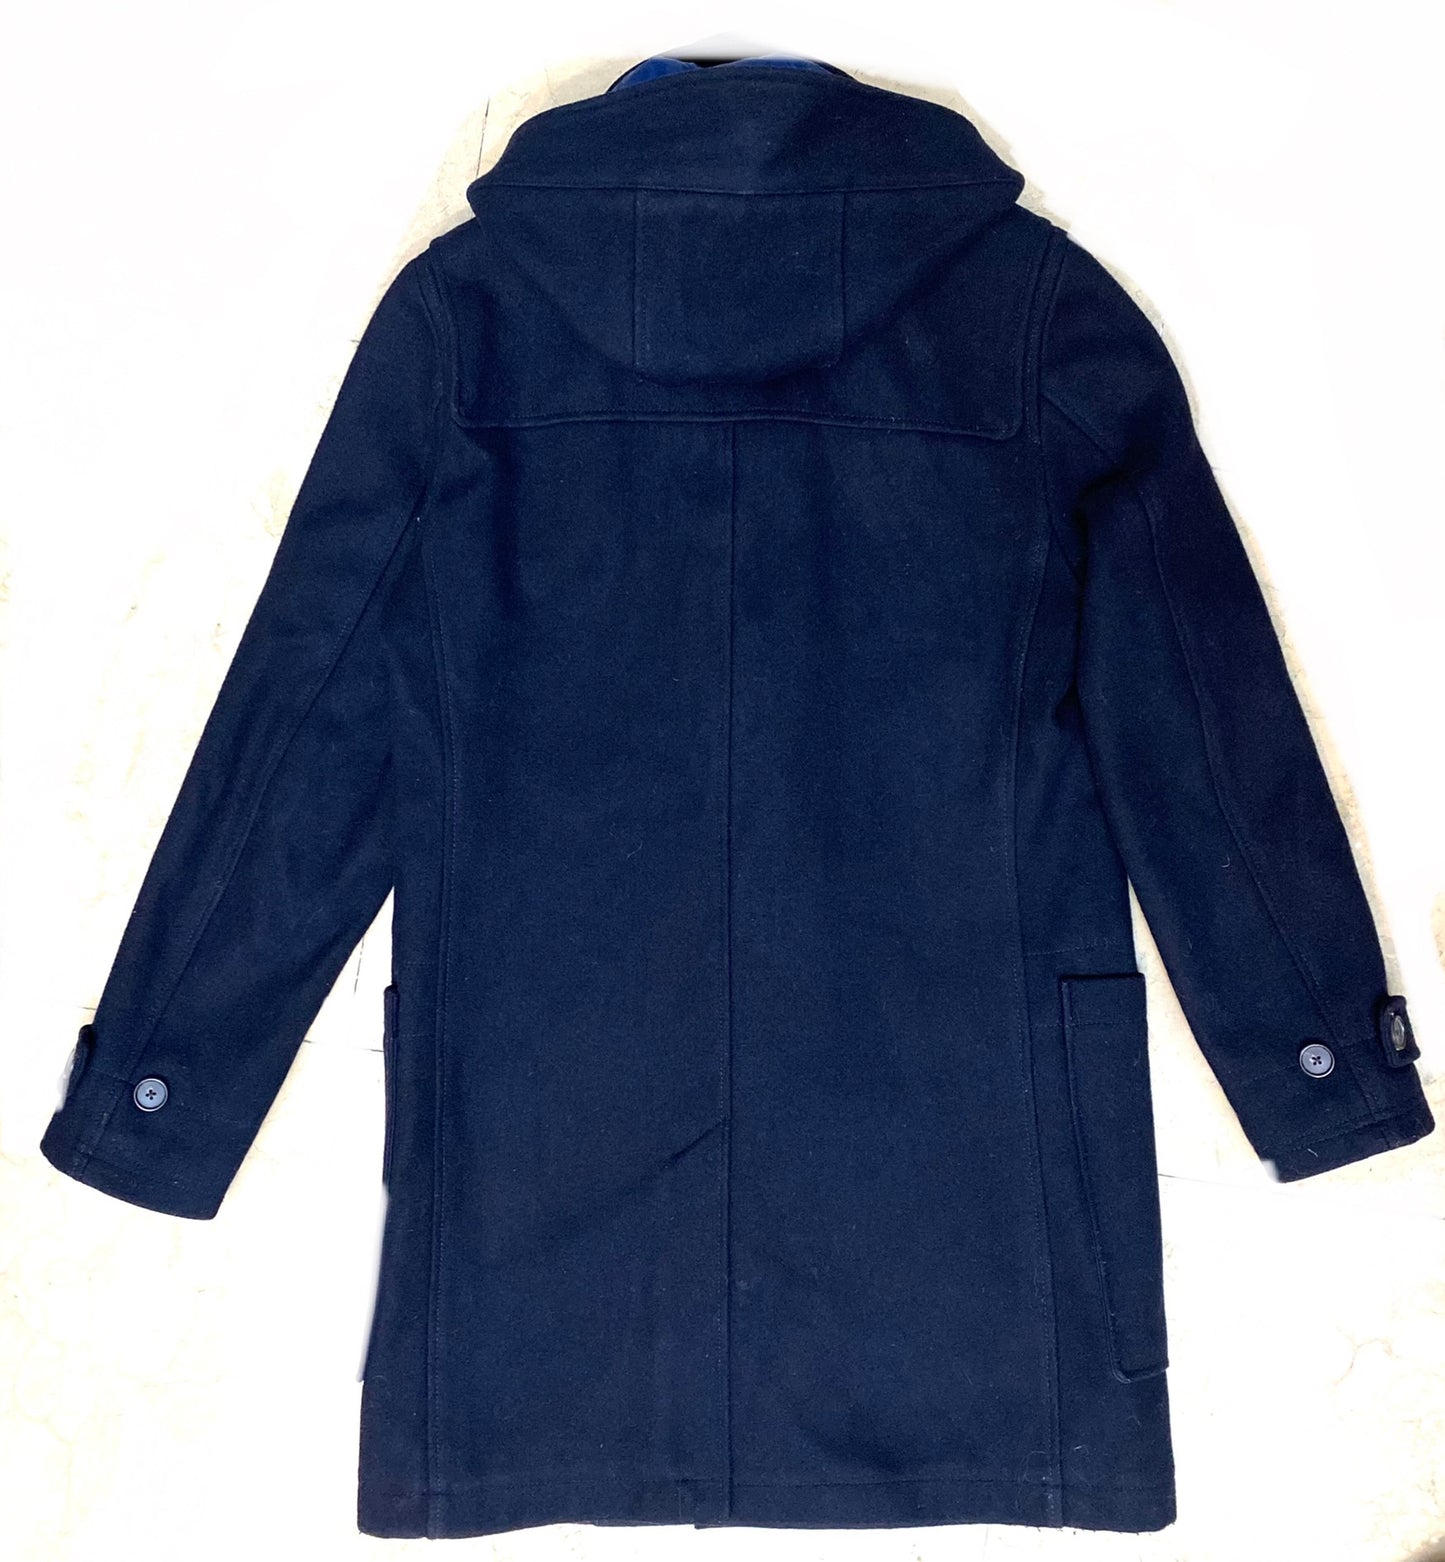 Tommy Hilfiger navy blue Montgomery hooded coat, 90s